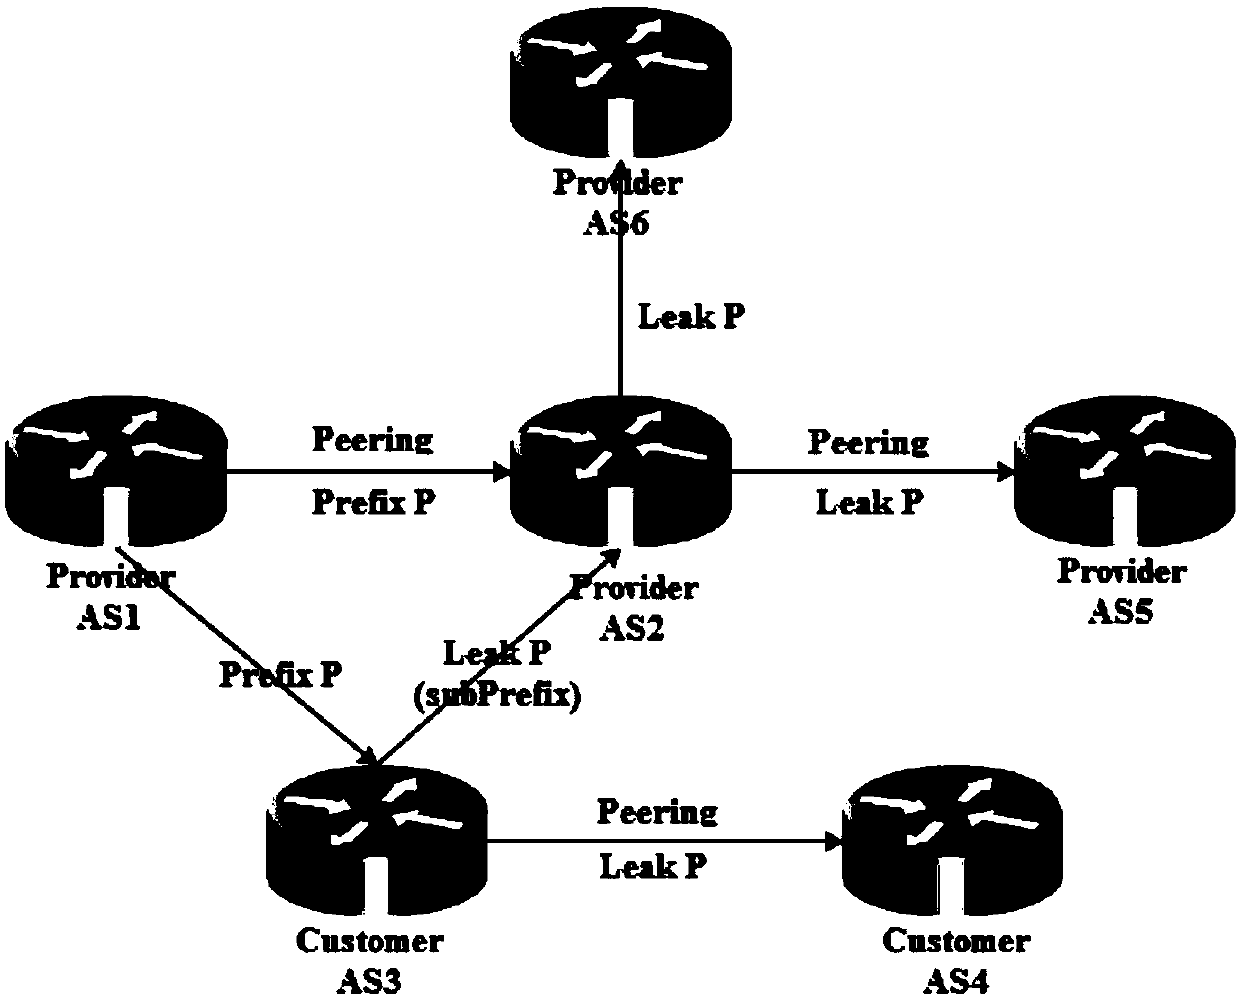 A method to simultaneously solve prefix hijacking, path hijacking and route leaking attacks